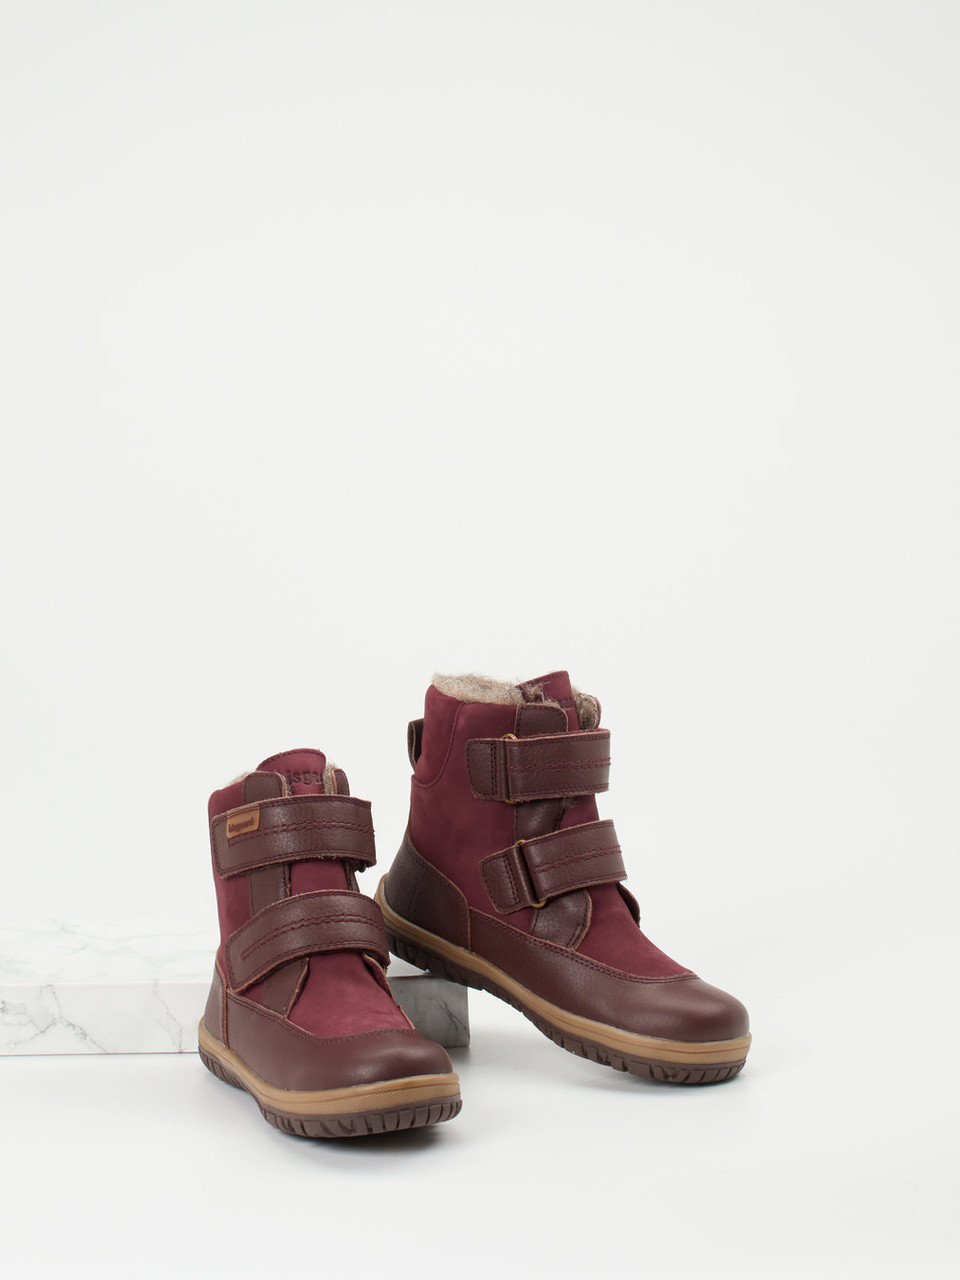 Klettboots rot 6830509002904